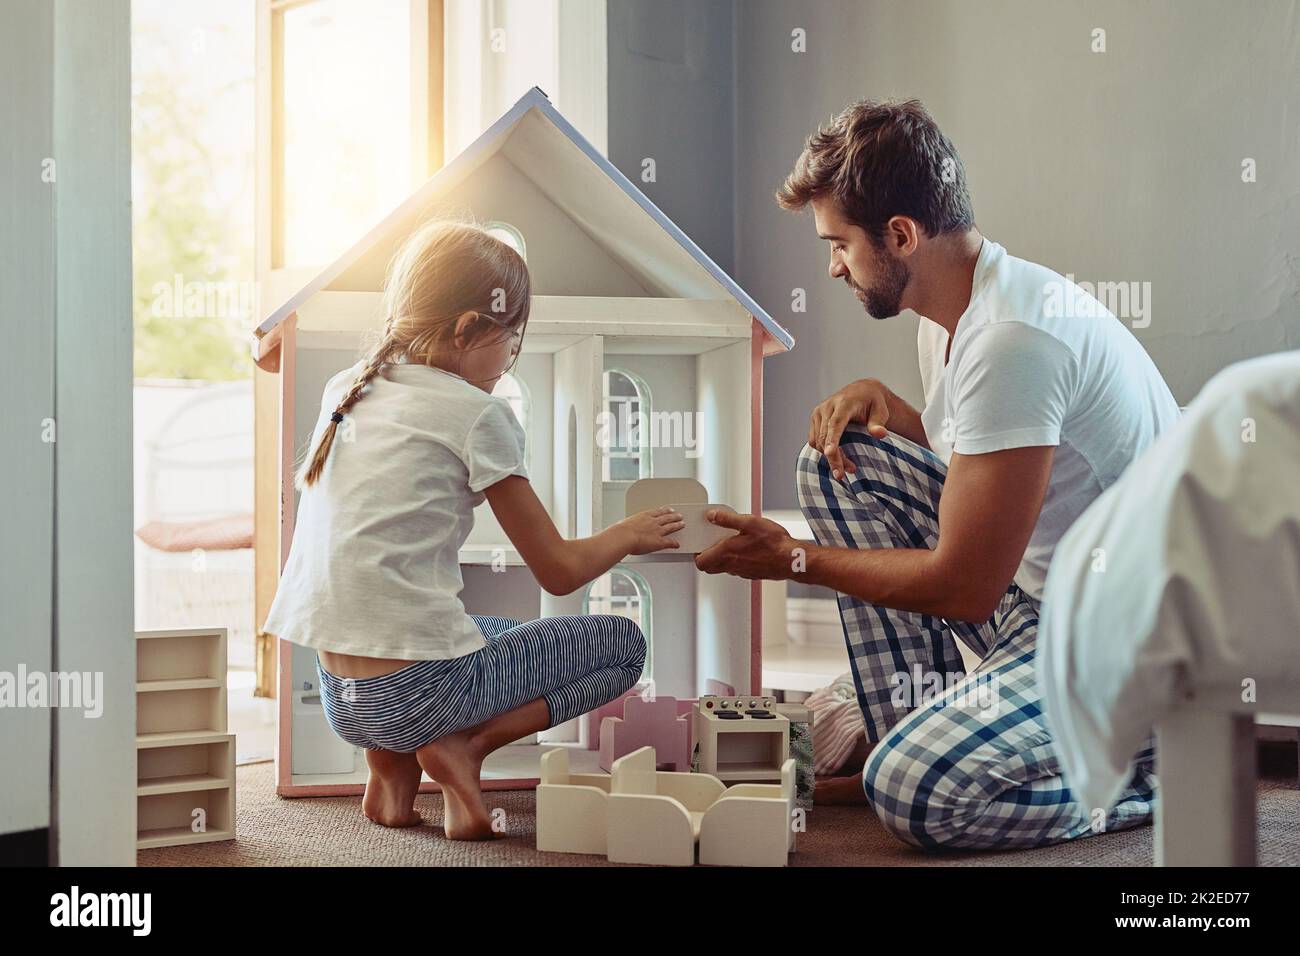 Invest the time to win her heart. Shot of an adorable little girl spending time with her father at home. Stock Photo